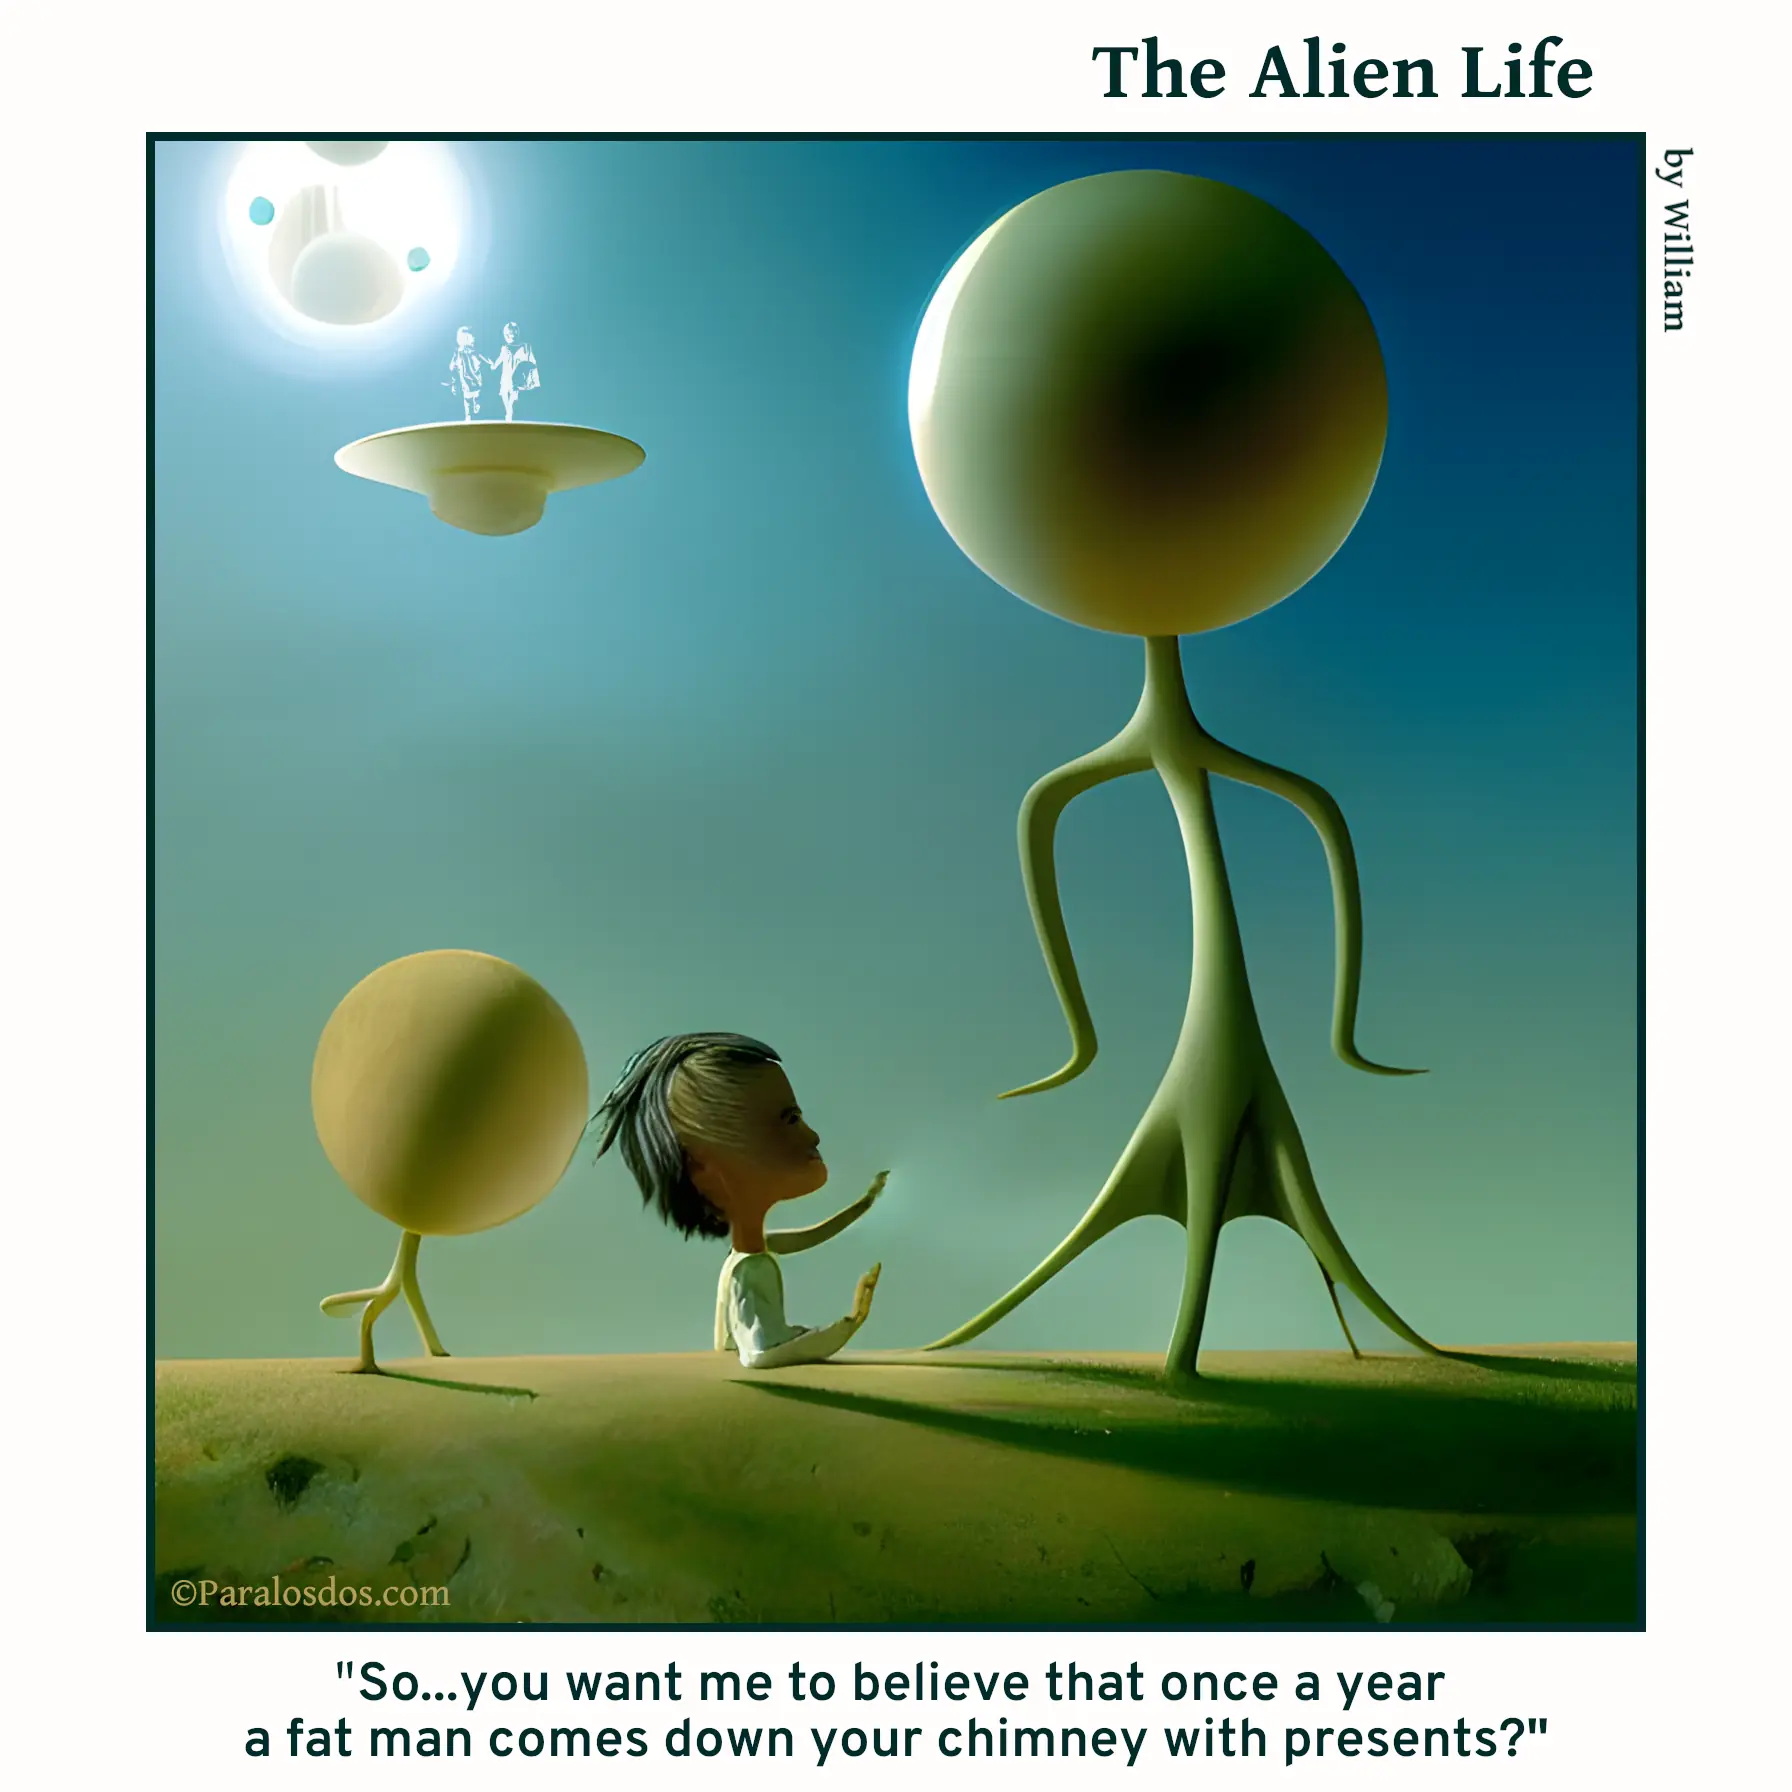 The Alien Life one panel Comic. An Alien is looking at a kid and the caption says: "So...you want me to believe that once a year a fat man comes down your chimney with presents?"